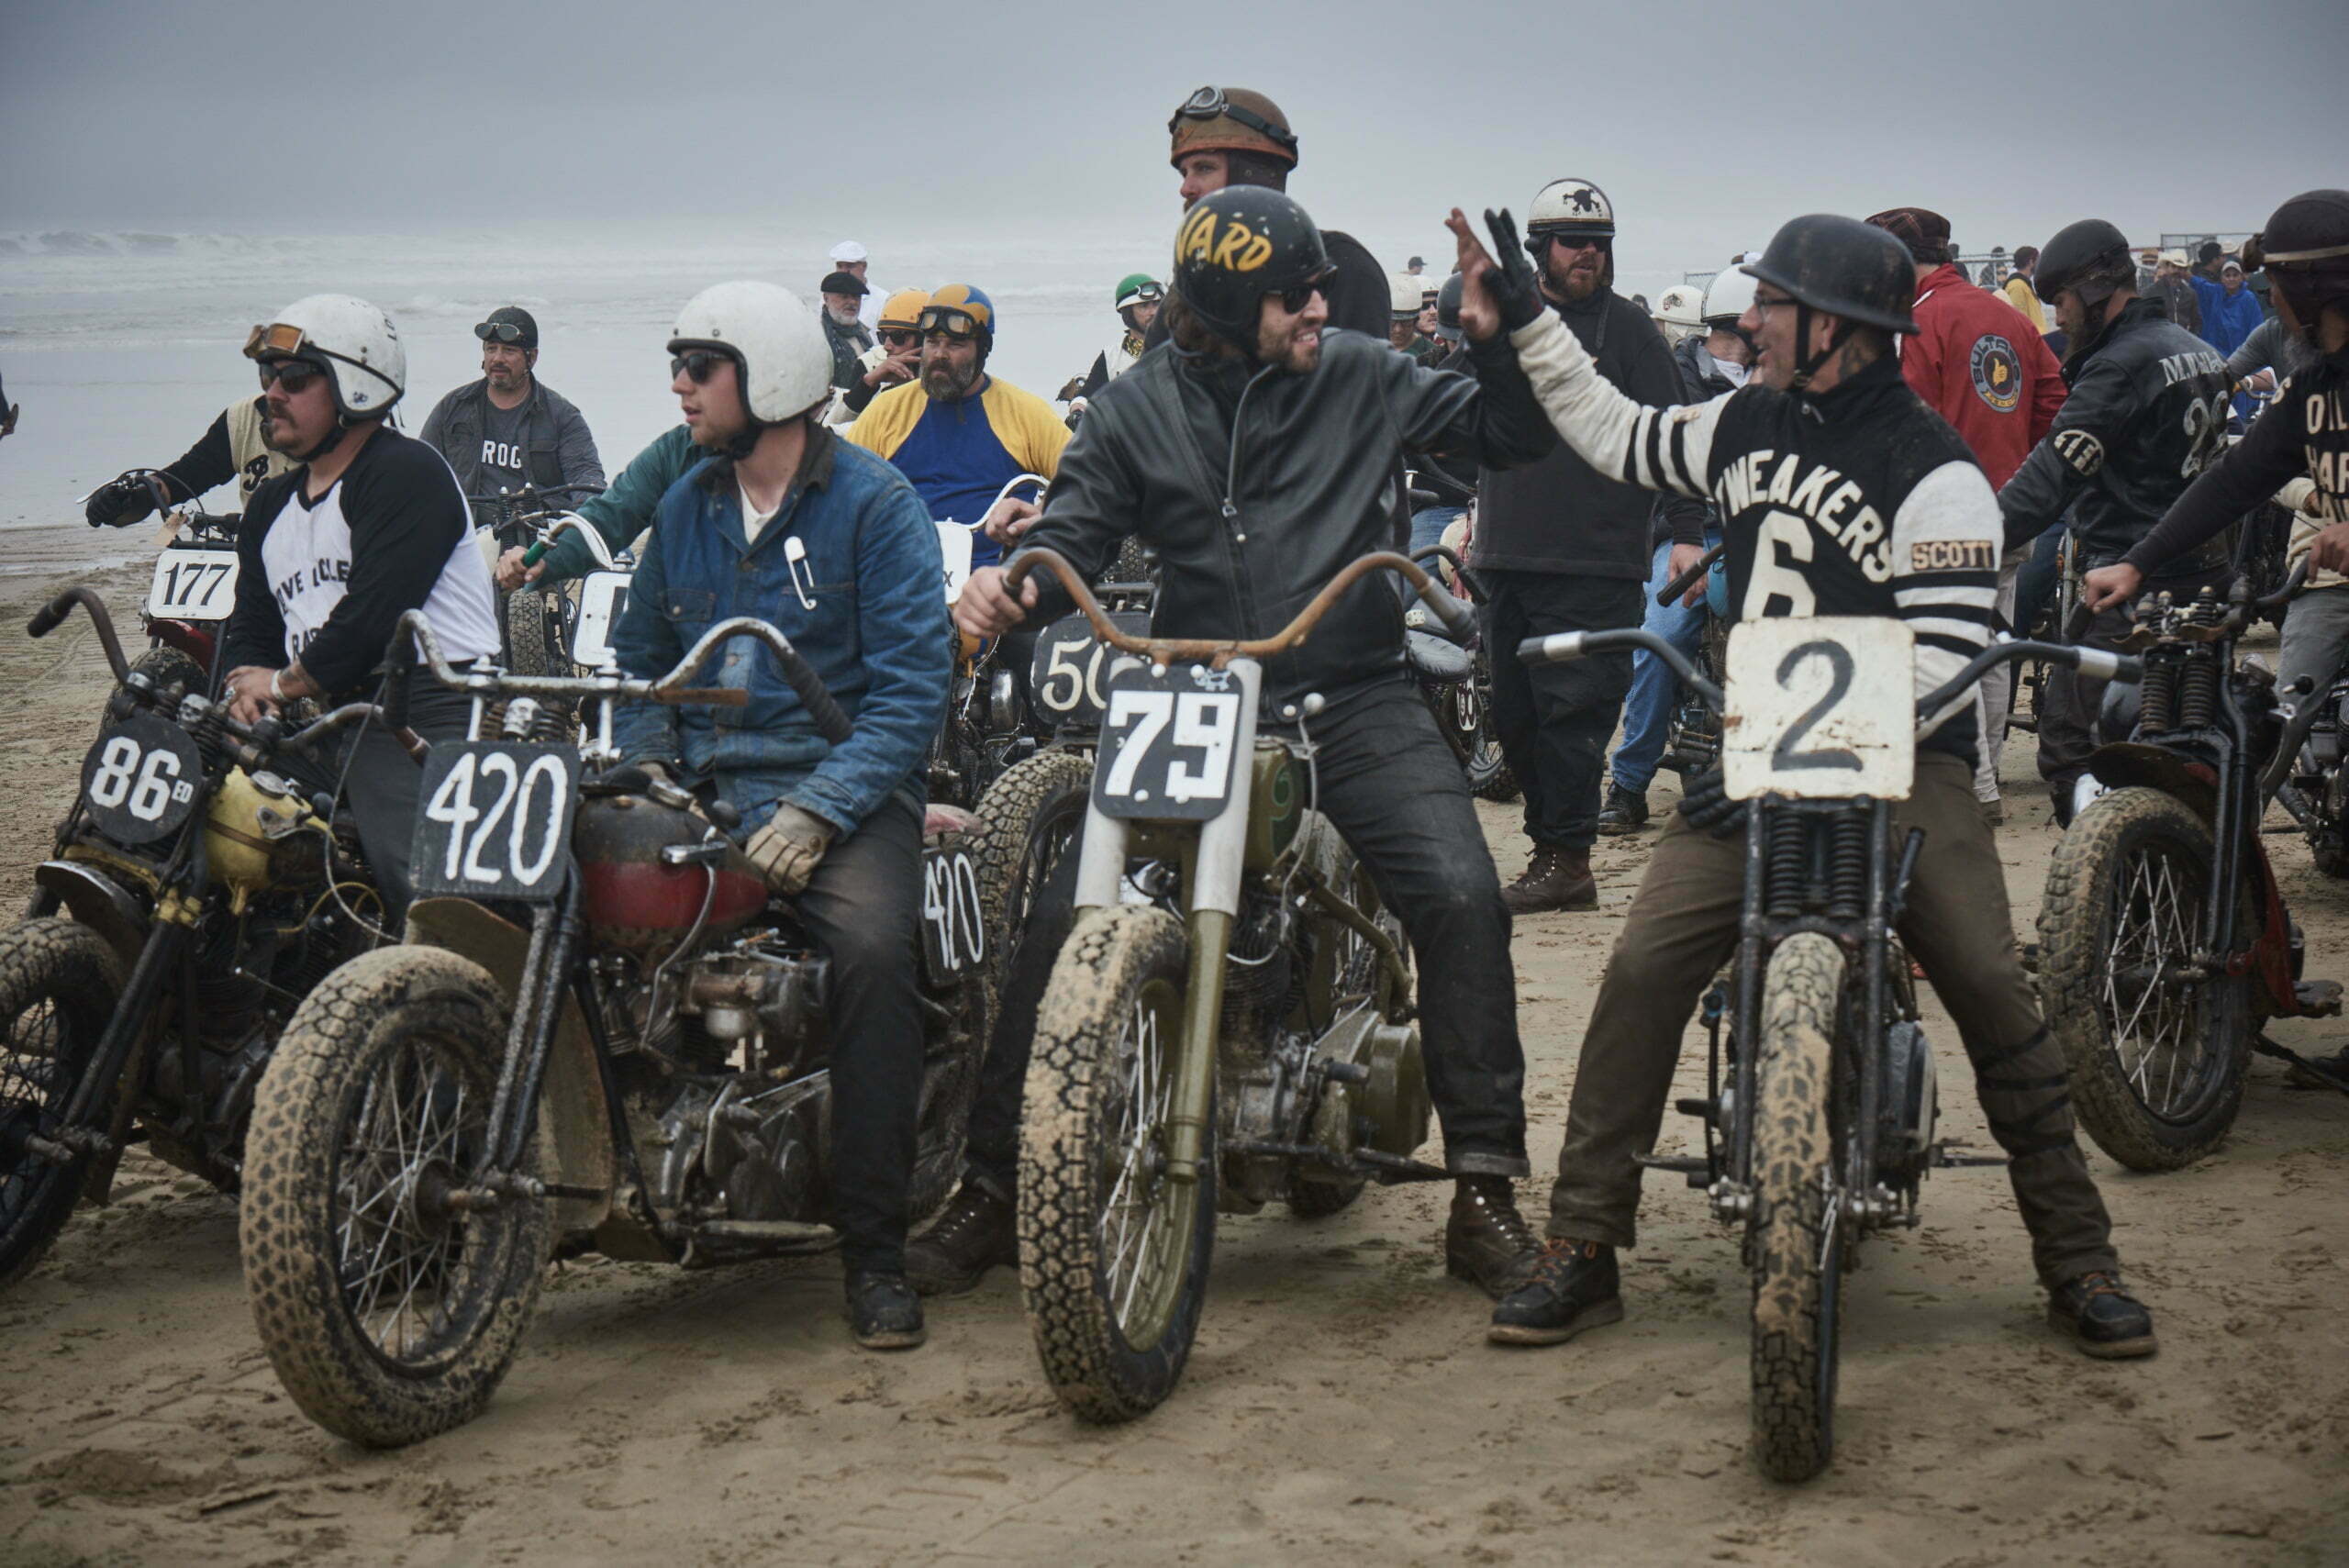 High Fives at The Race of Gentleman